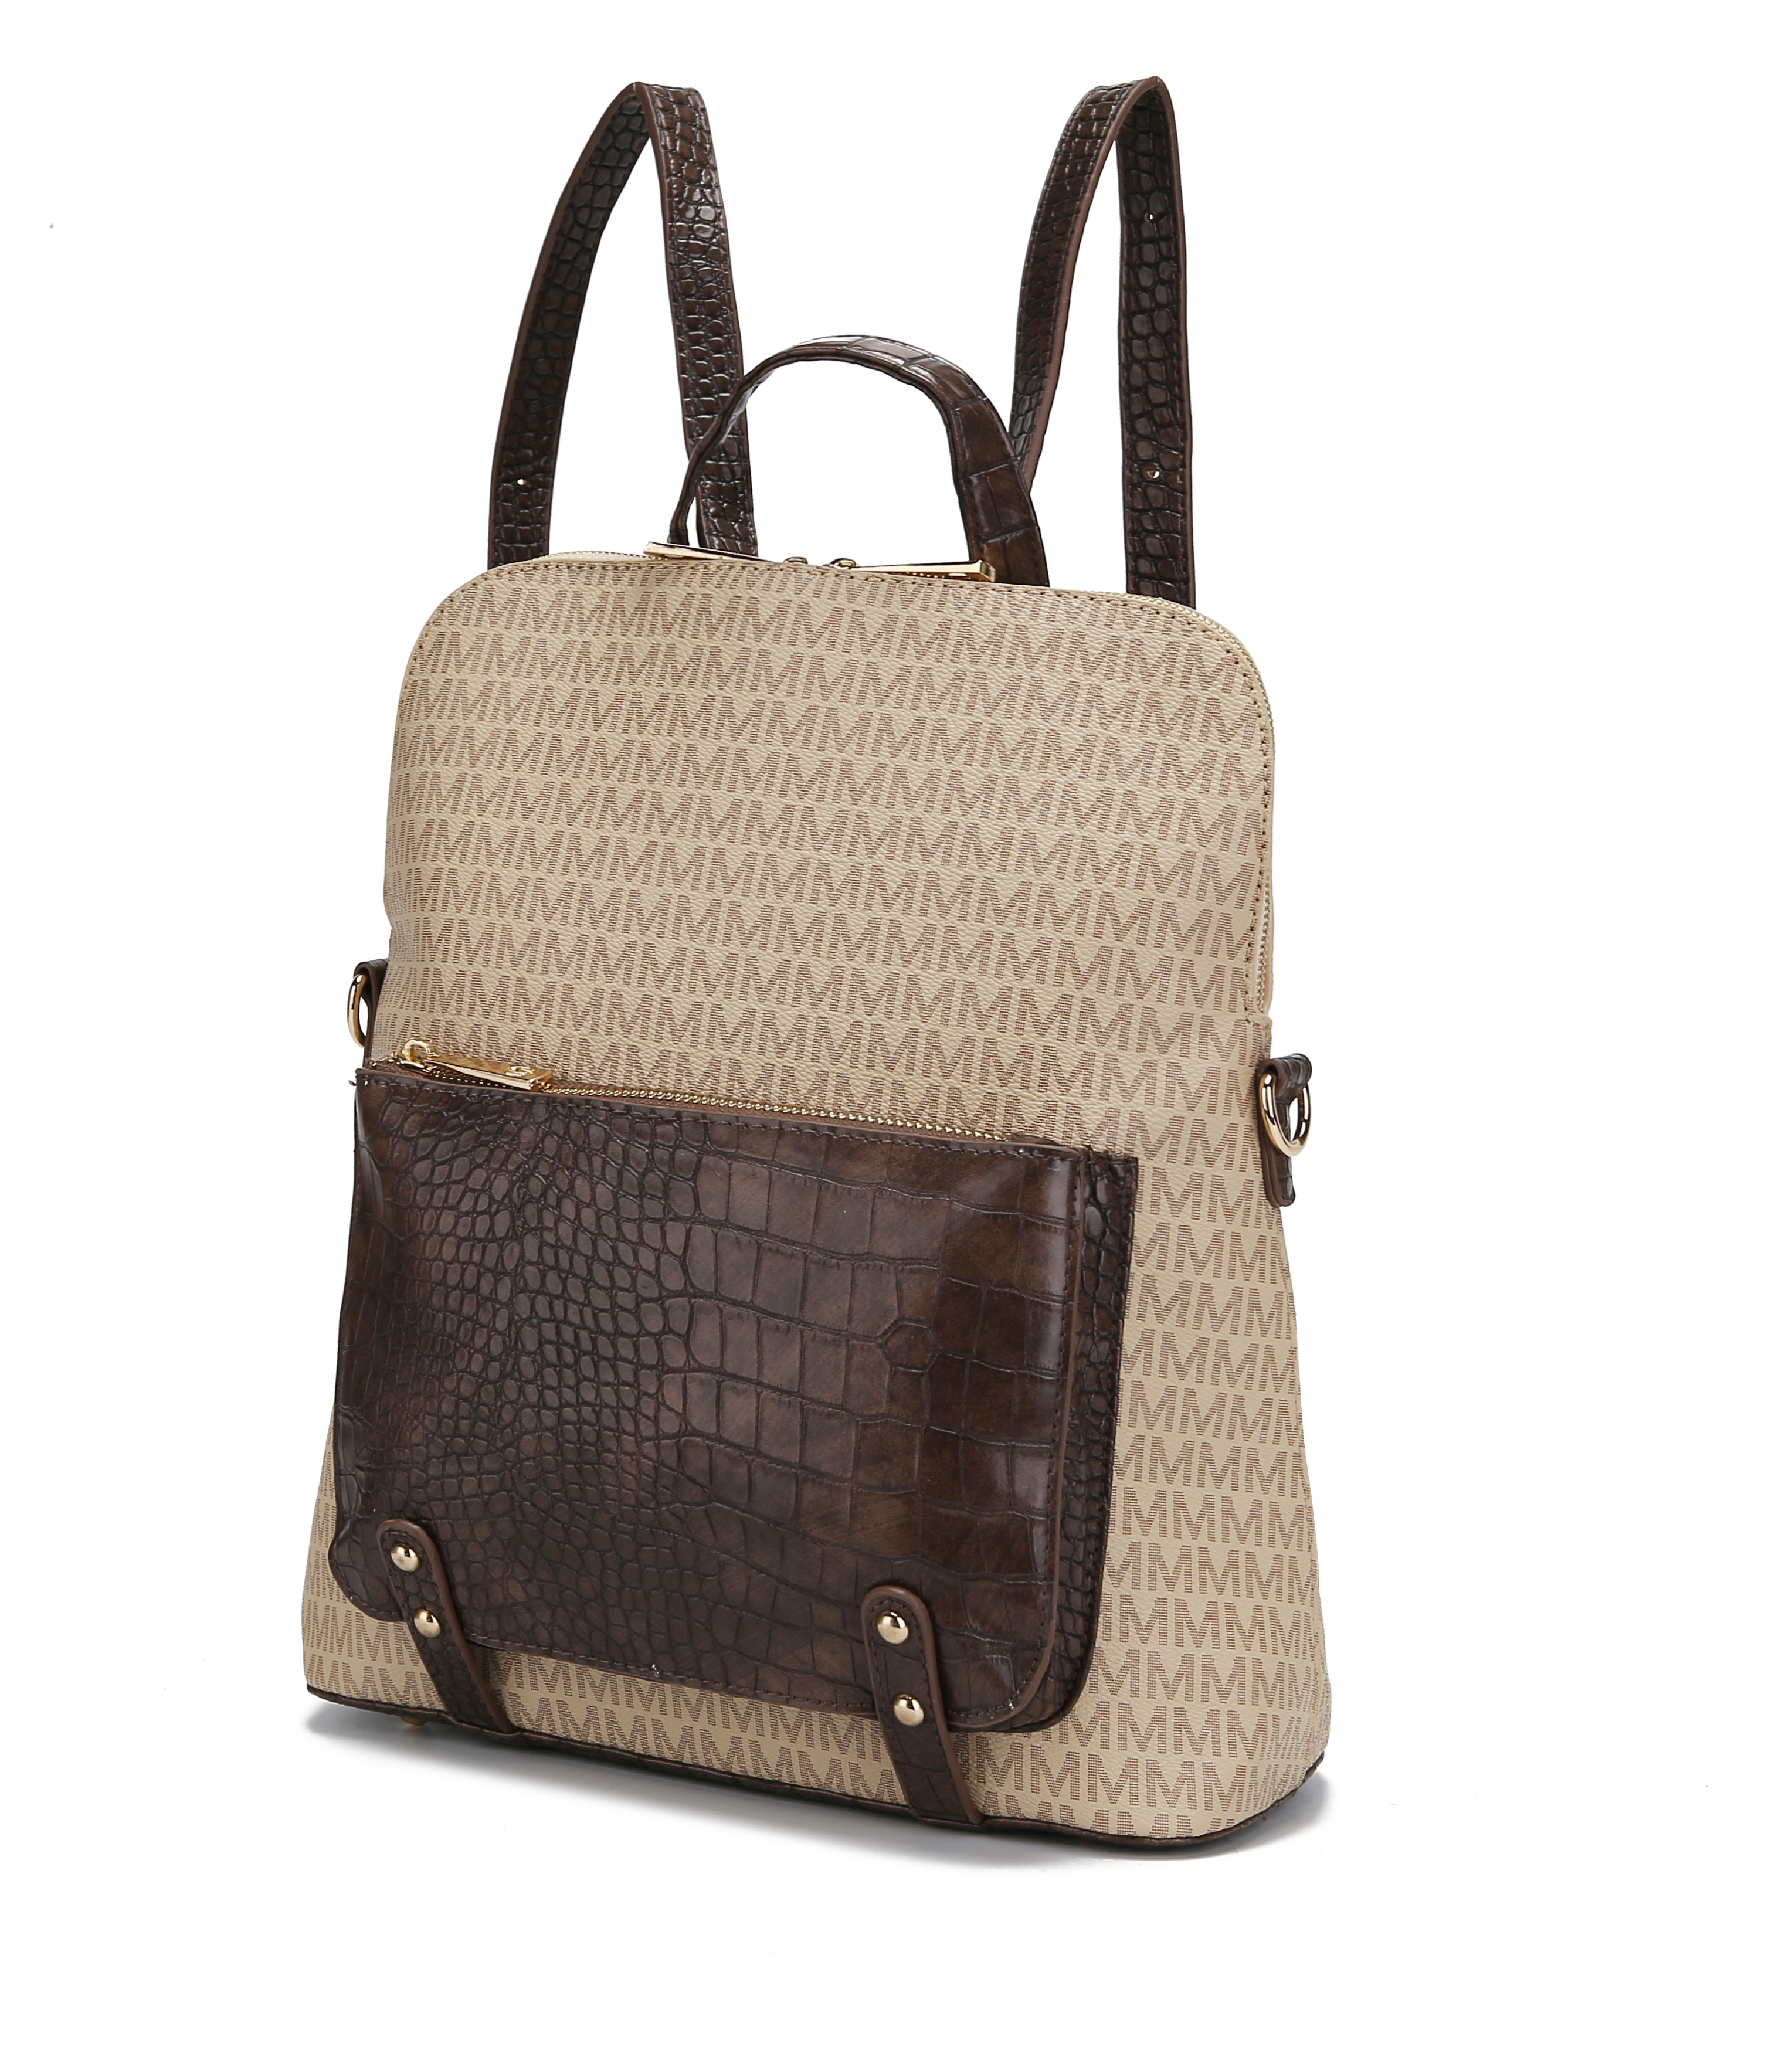 Mia K. Collection&nbsp;Rede Signature Backpack - image 1 of 10